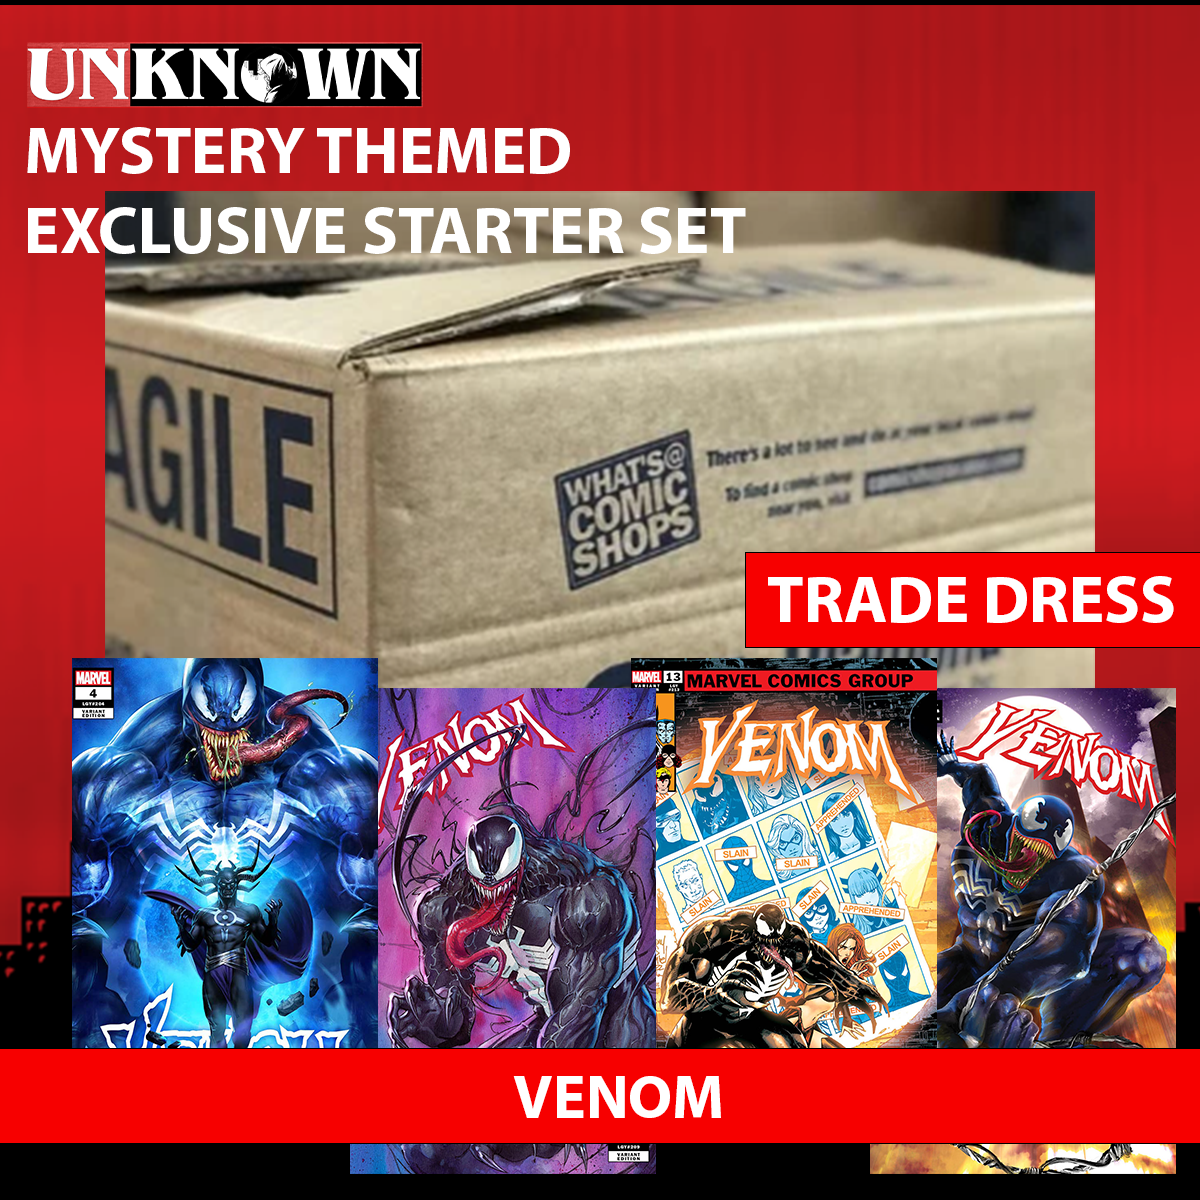 UNKNOWN COMICS MYSTERY THEMED 👉VENOM STORE EXCLUSIVE STARTER SET: MIXED CASE OF EXCLUSIVE COMIC BOOKS 👉TRADE DRESS ESTIMATED 120-200 COMICS (12/06/2023)